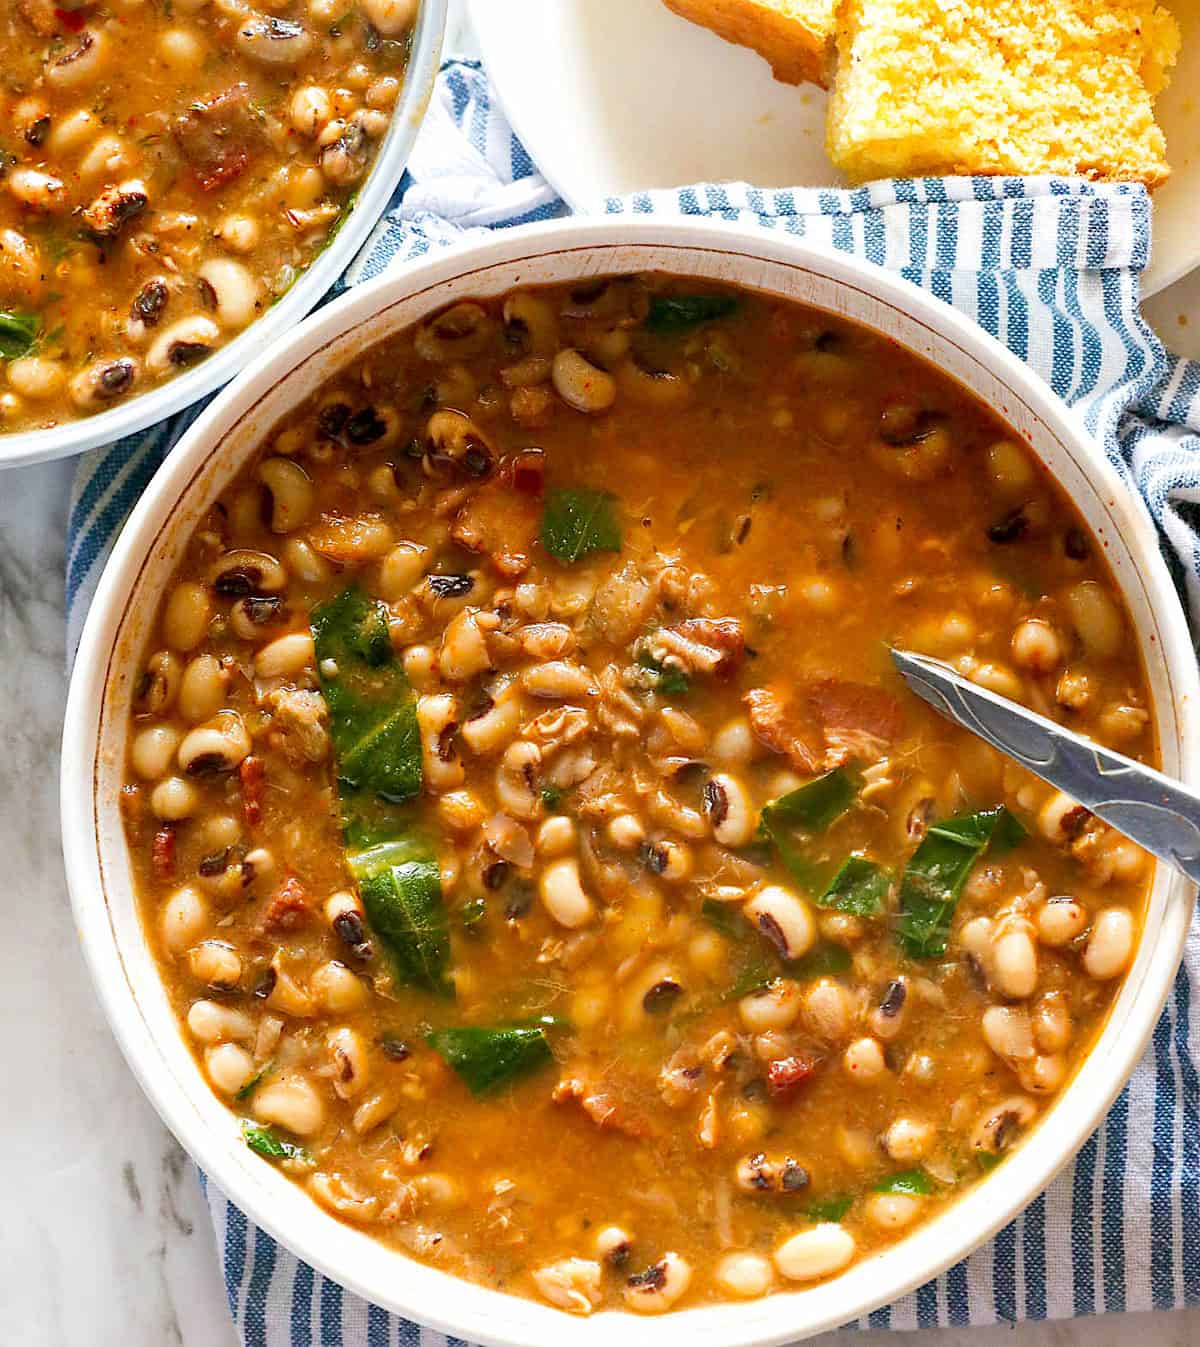 A comforting bowl of black-eyed pea soup